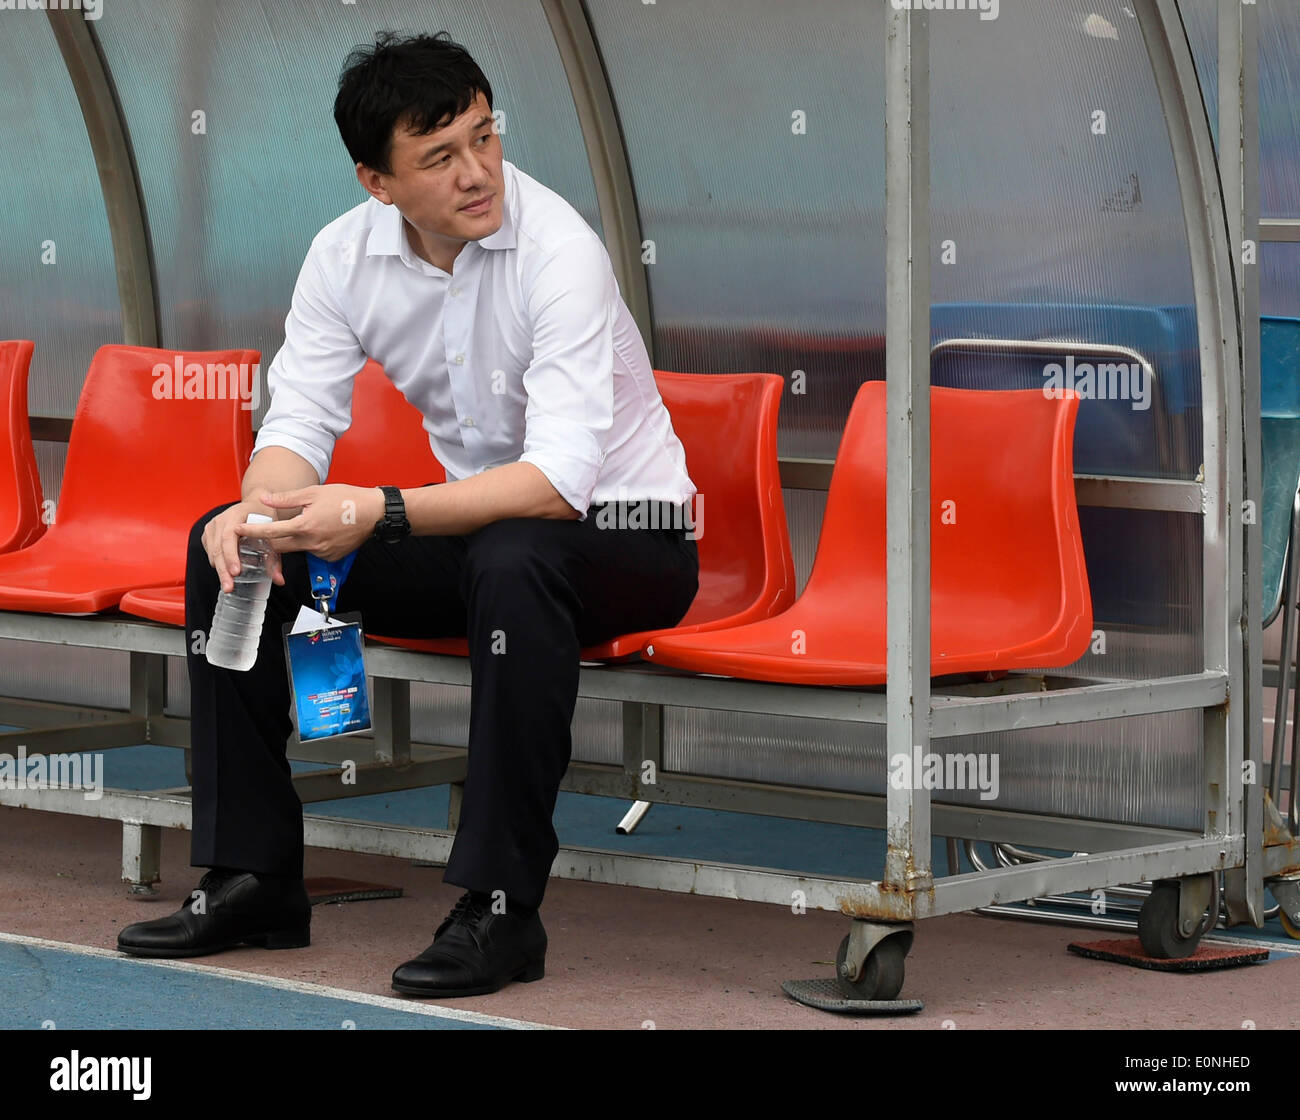 Ho Chi Minh, Vietnam. 17th May, 2014. China's head coach Hao Wei takes a rest before the Group B match against Myanmar at the 2014 Women's AFC Cup held at Thong Nhat Stadium in Ho Chi Minh city, Vietnam, May 17, 2014. China advanced to World Cup 2015 after beating Myanmar 3-0. © He Jingjia/Xinhua/Alamy Live News Stock Photo